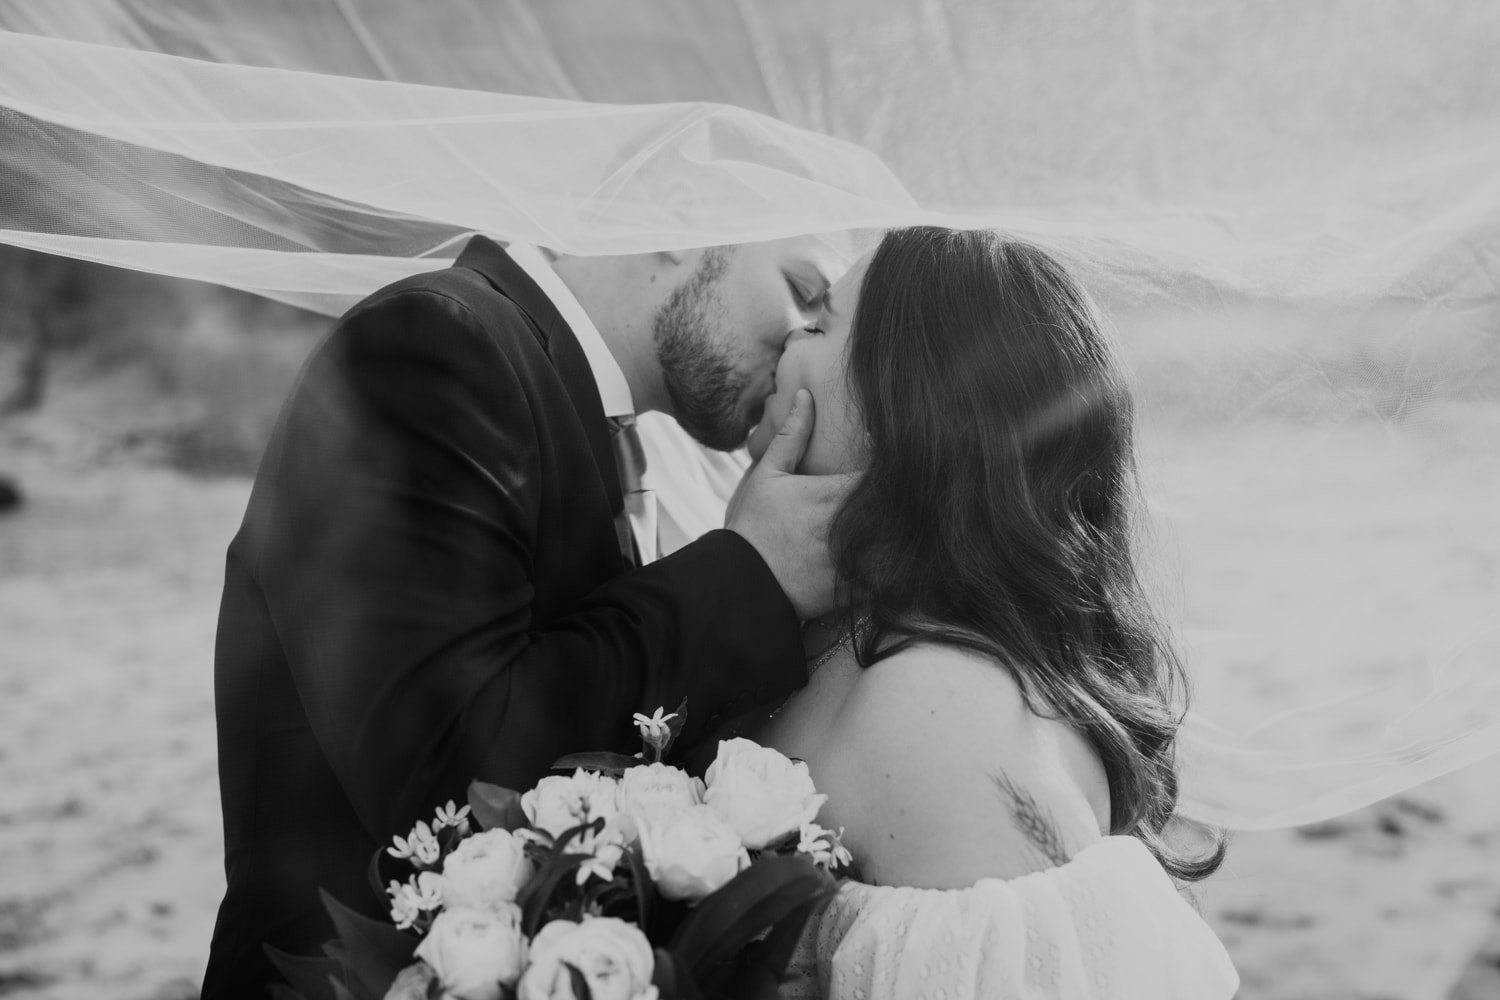 A black and white photo of the bride and groom sharing a kiss after their wedding ceremony at Hug Point.